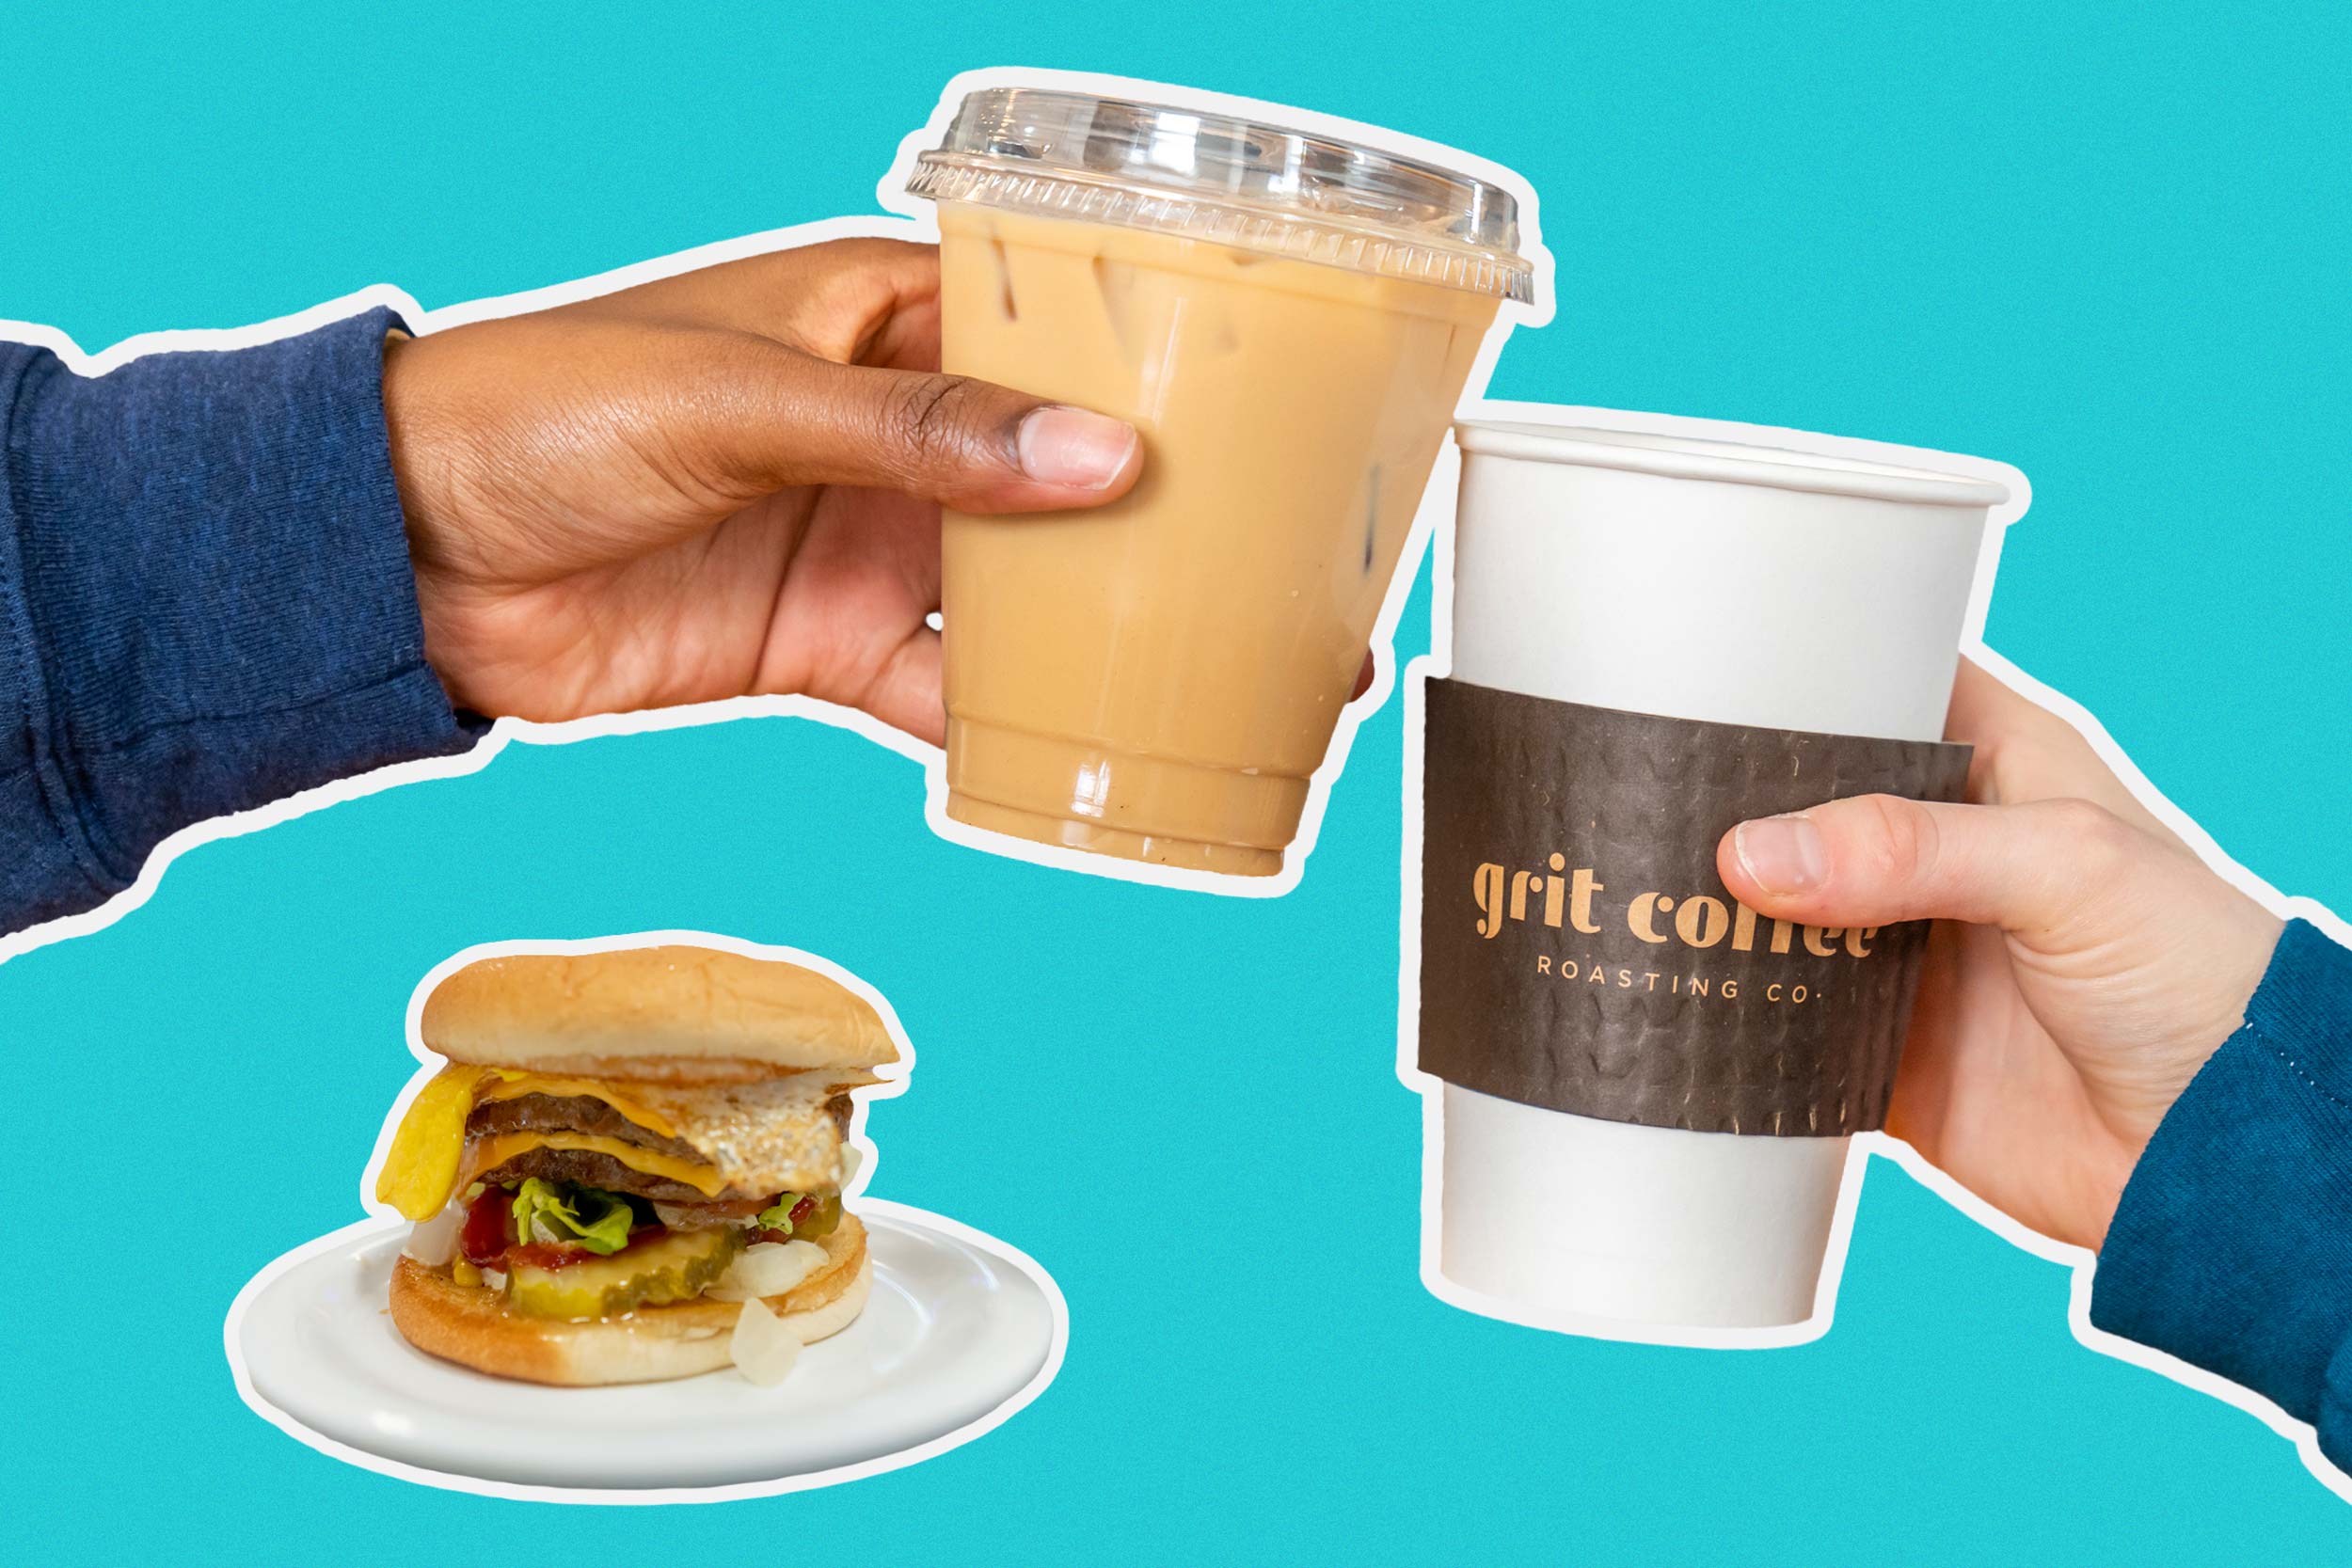 How to Squeeze the Most Out of About $5 at Major Fast Food Chains